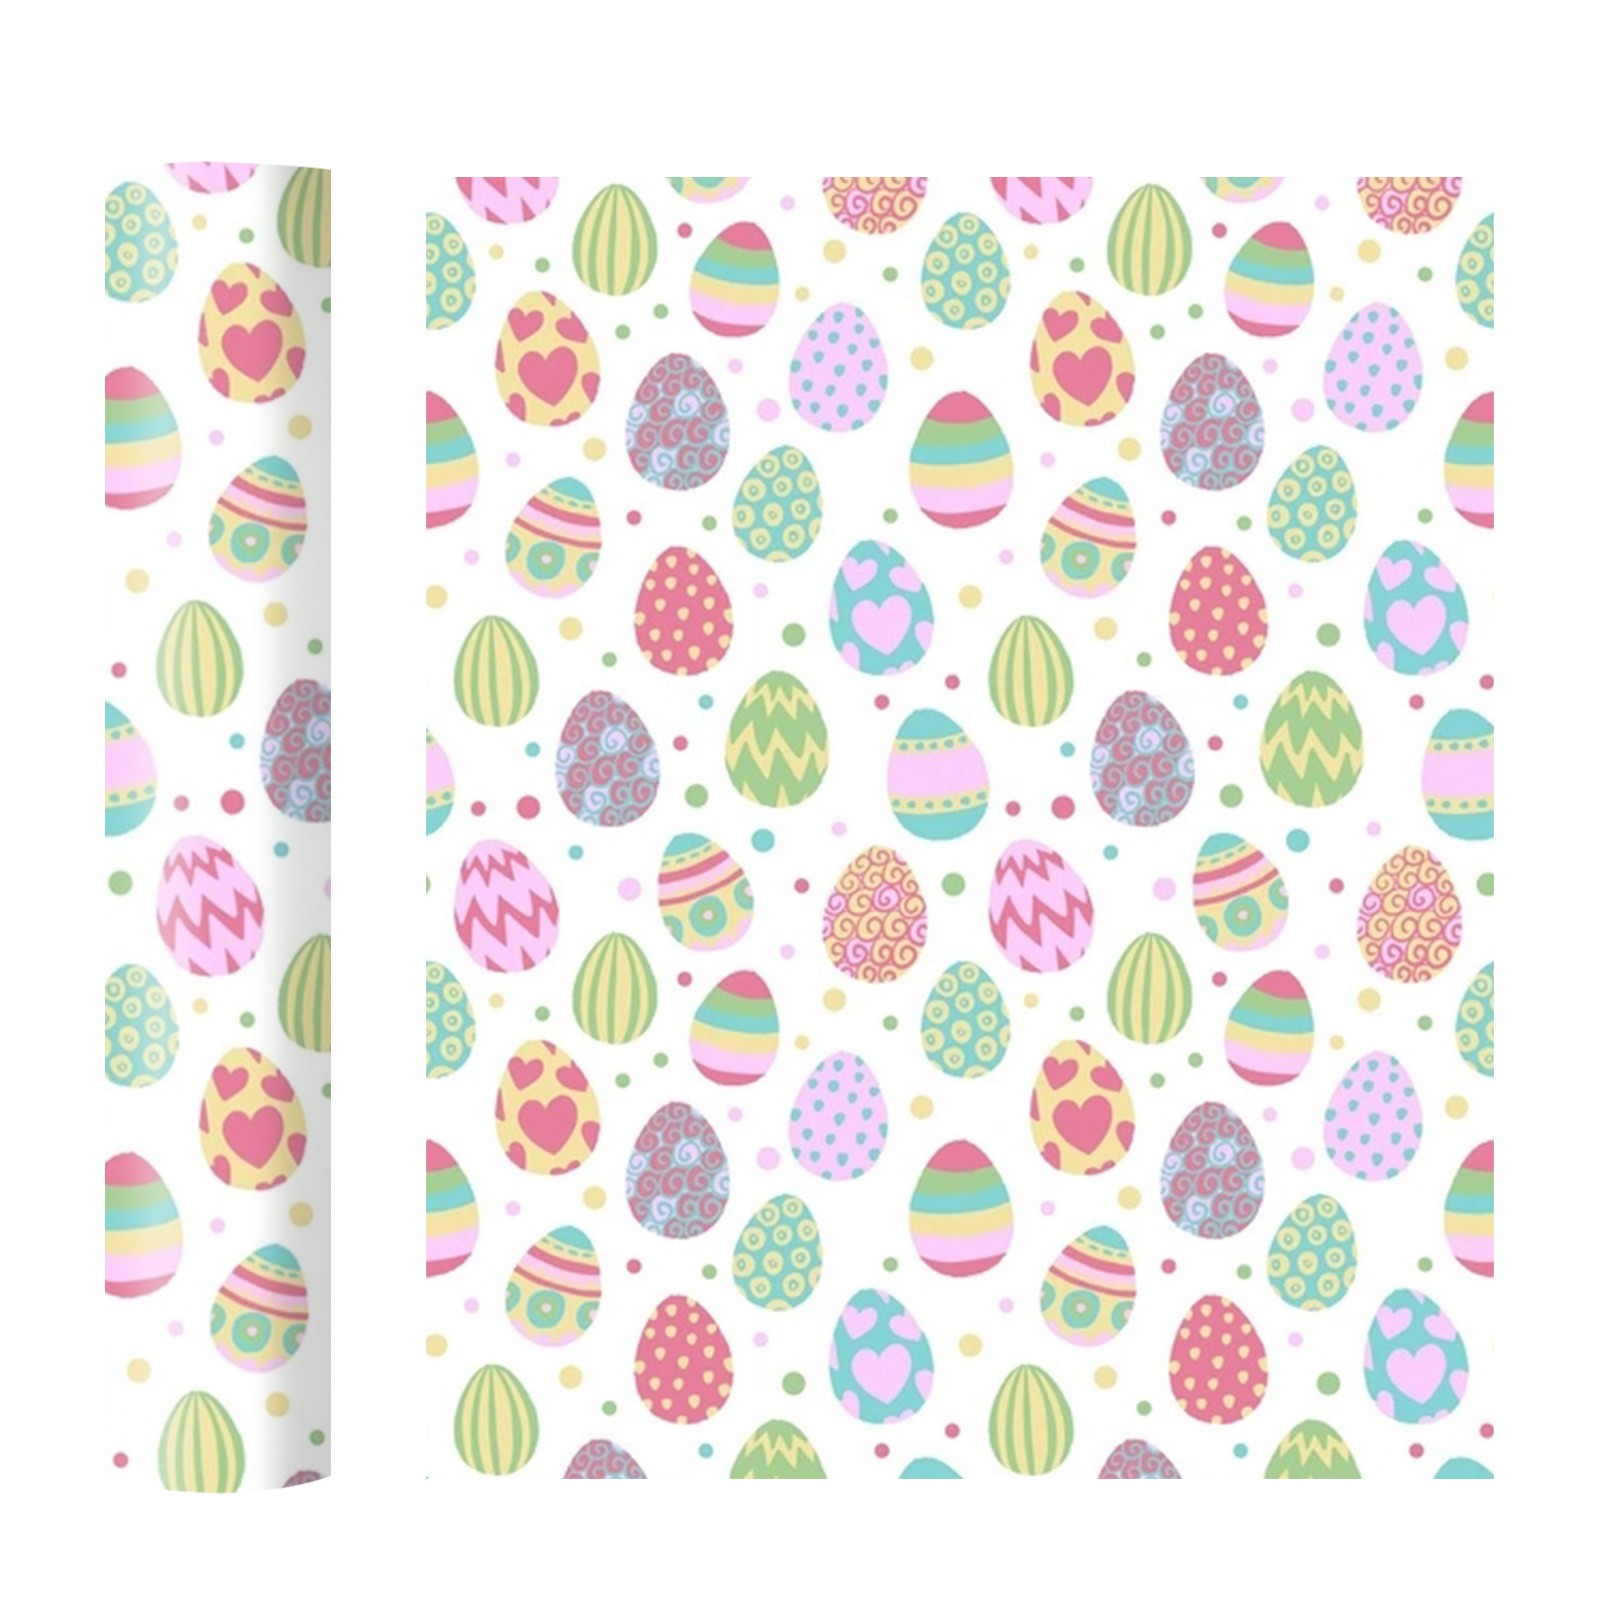 Happy Easter Day Heat Transfer Vinyl HTV Iron on Vinyl Bundle Bundle Suitable for Shirts Patterns, Size: One size, Other